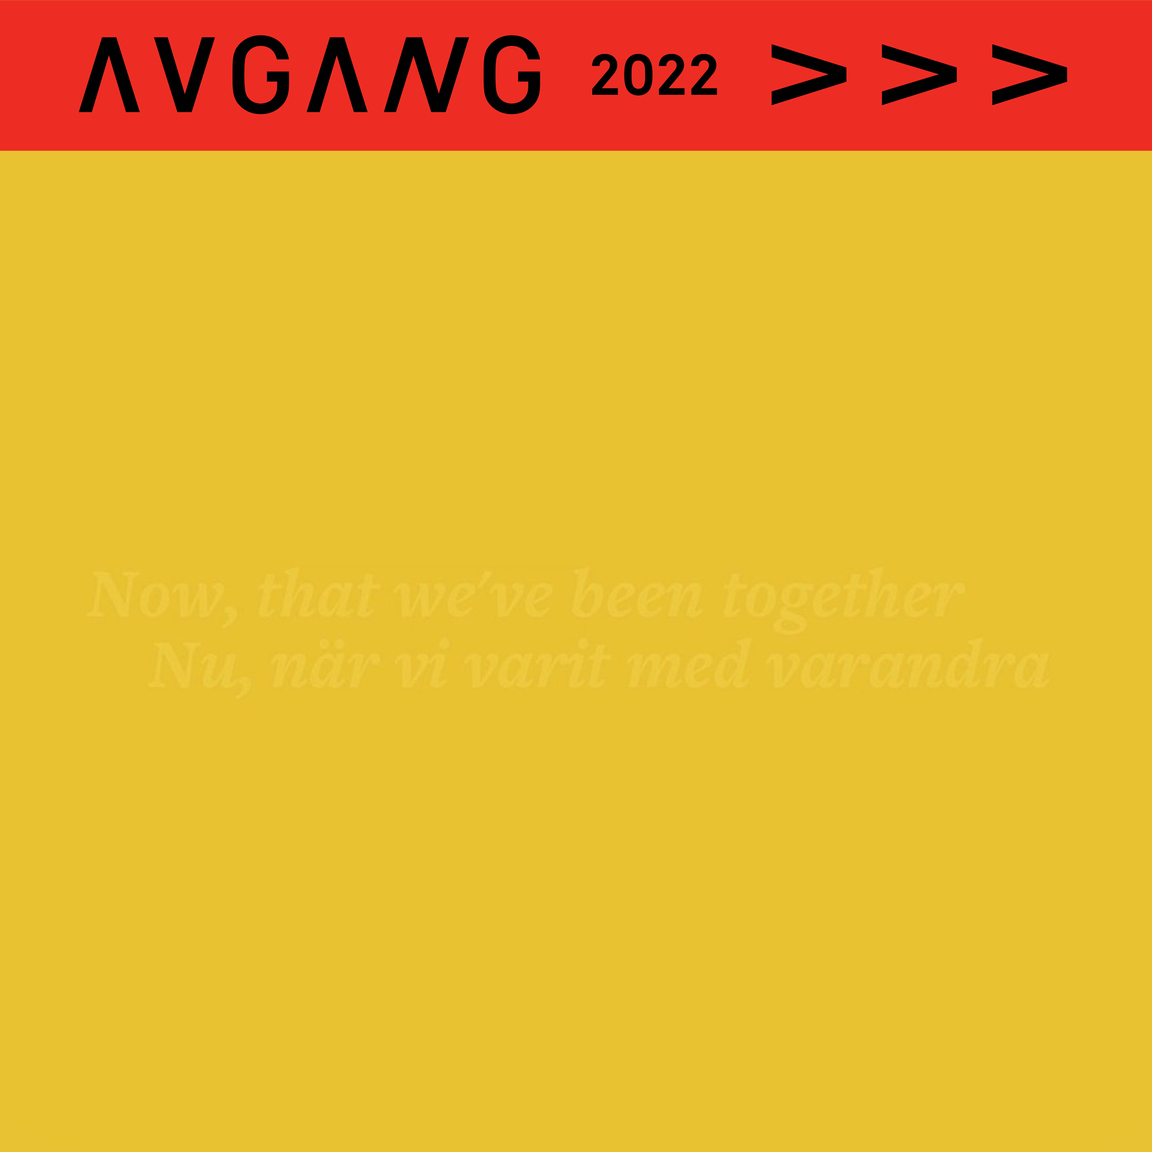 Avgang 2022: Now, that we’ve been together